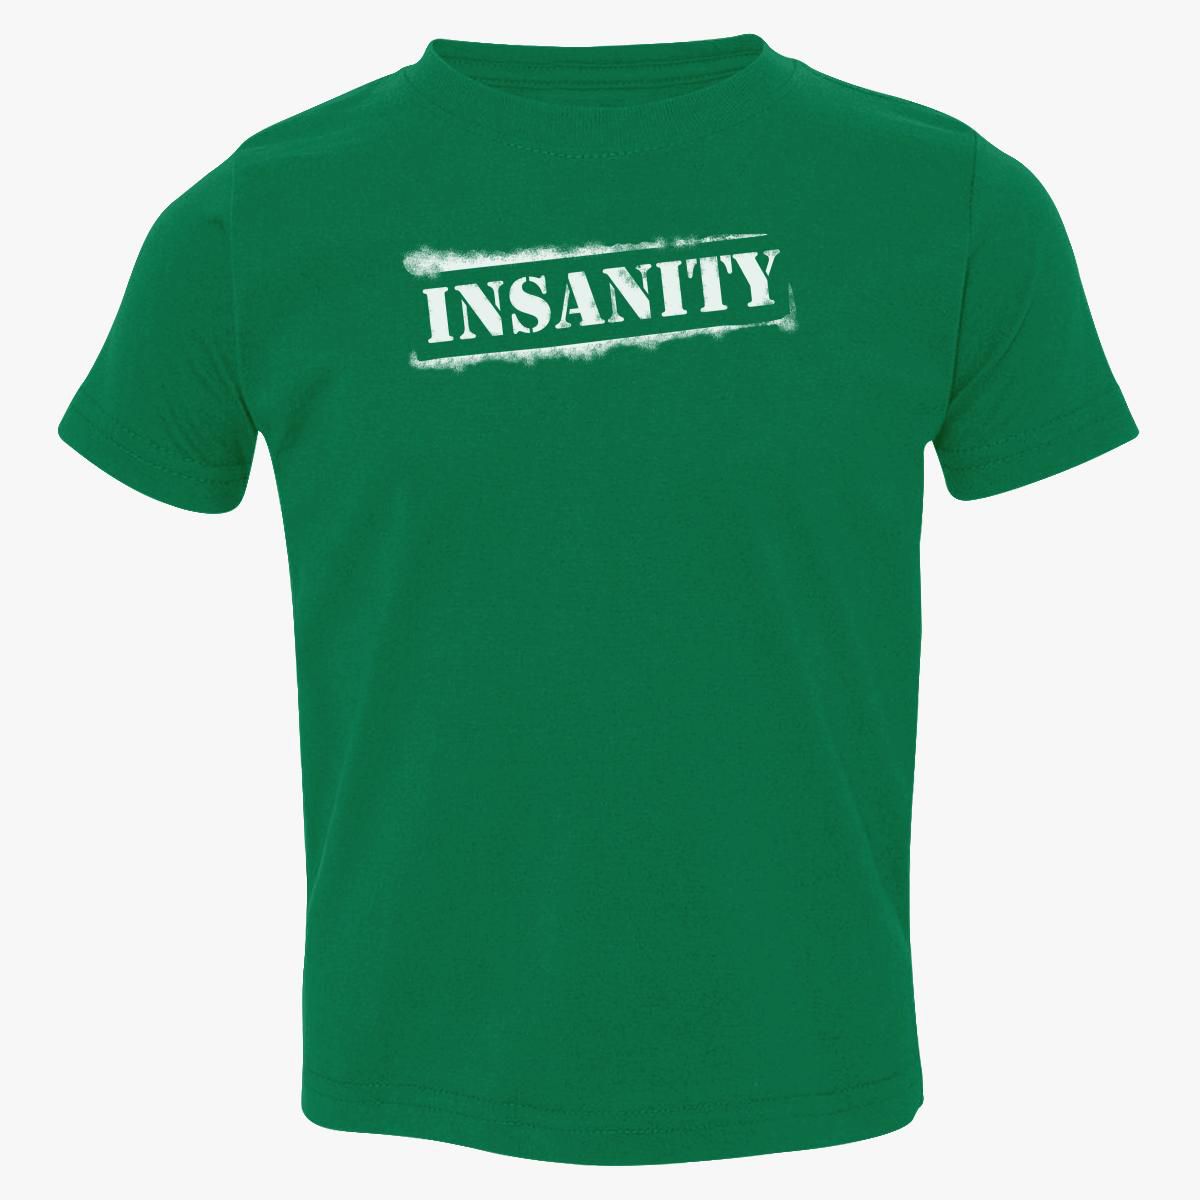 5 Day Insanity workout shirt for Burn Fat fast